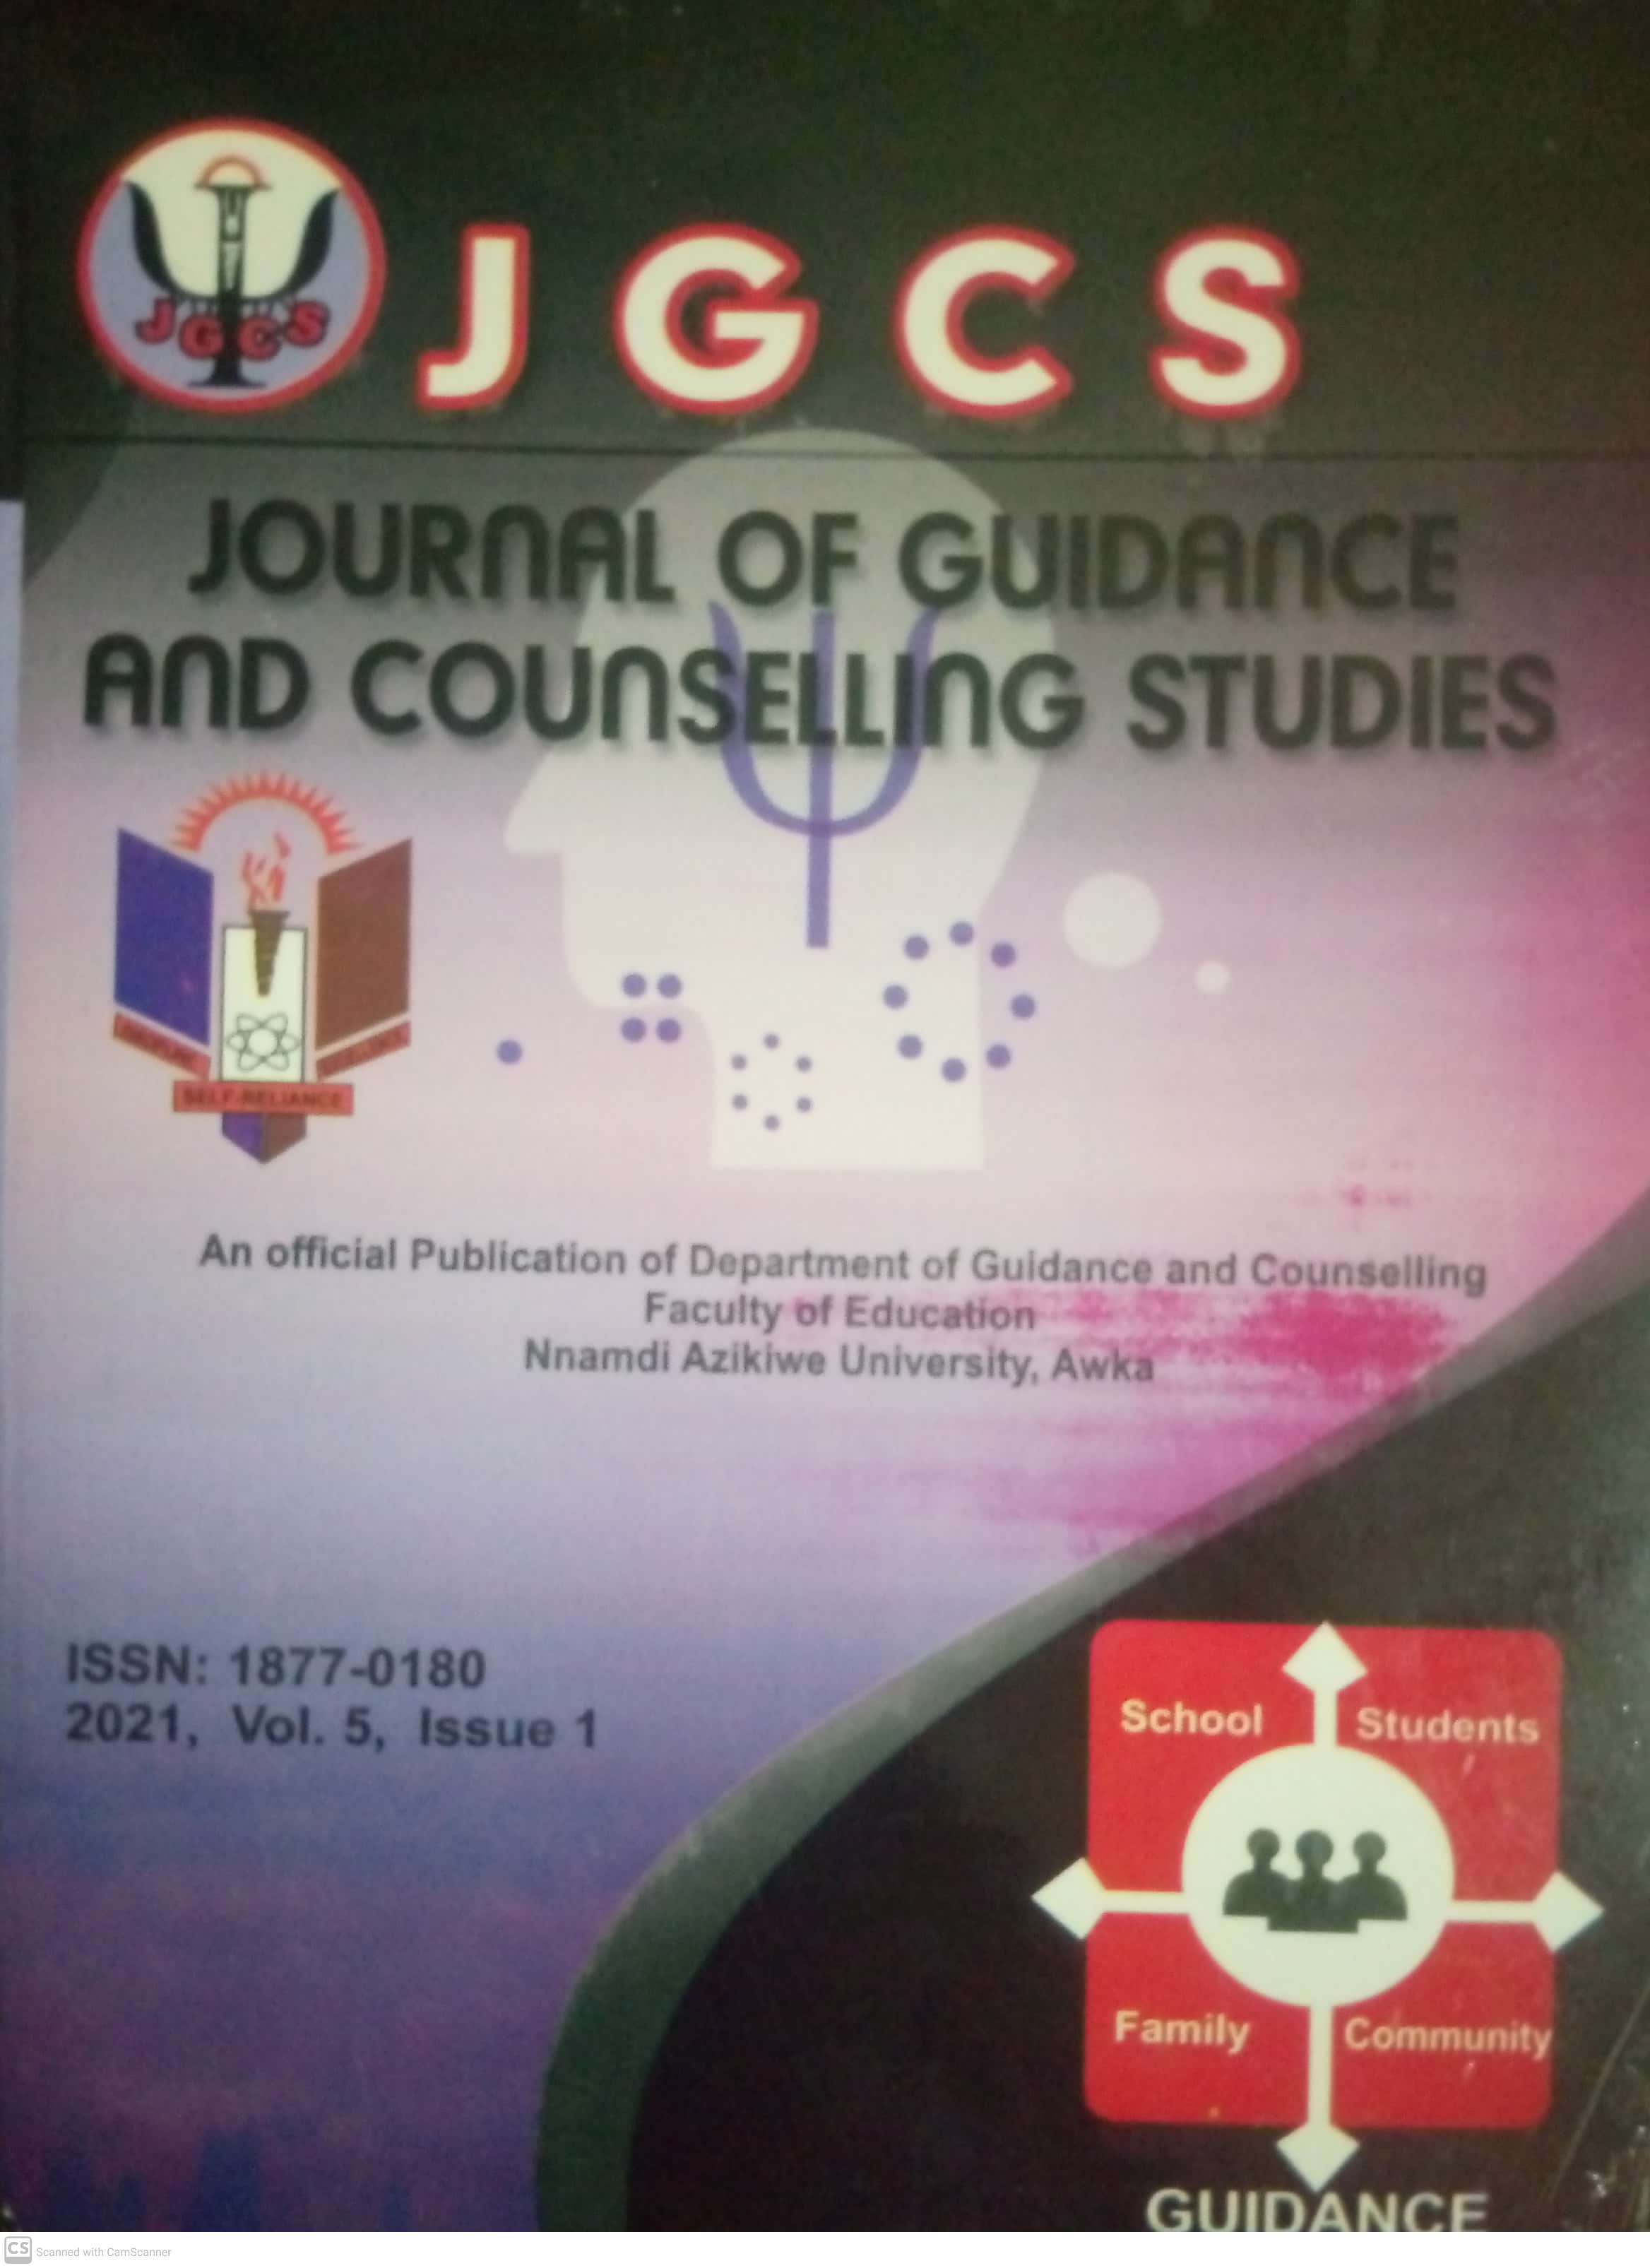 					View Vol. 5 No. 1 (2021): Journal of Guidance and Counselling Studies
				